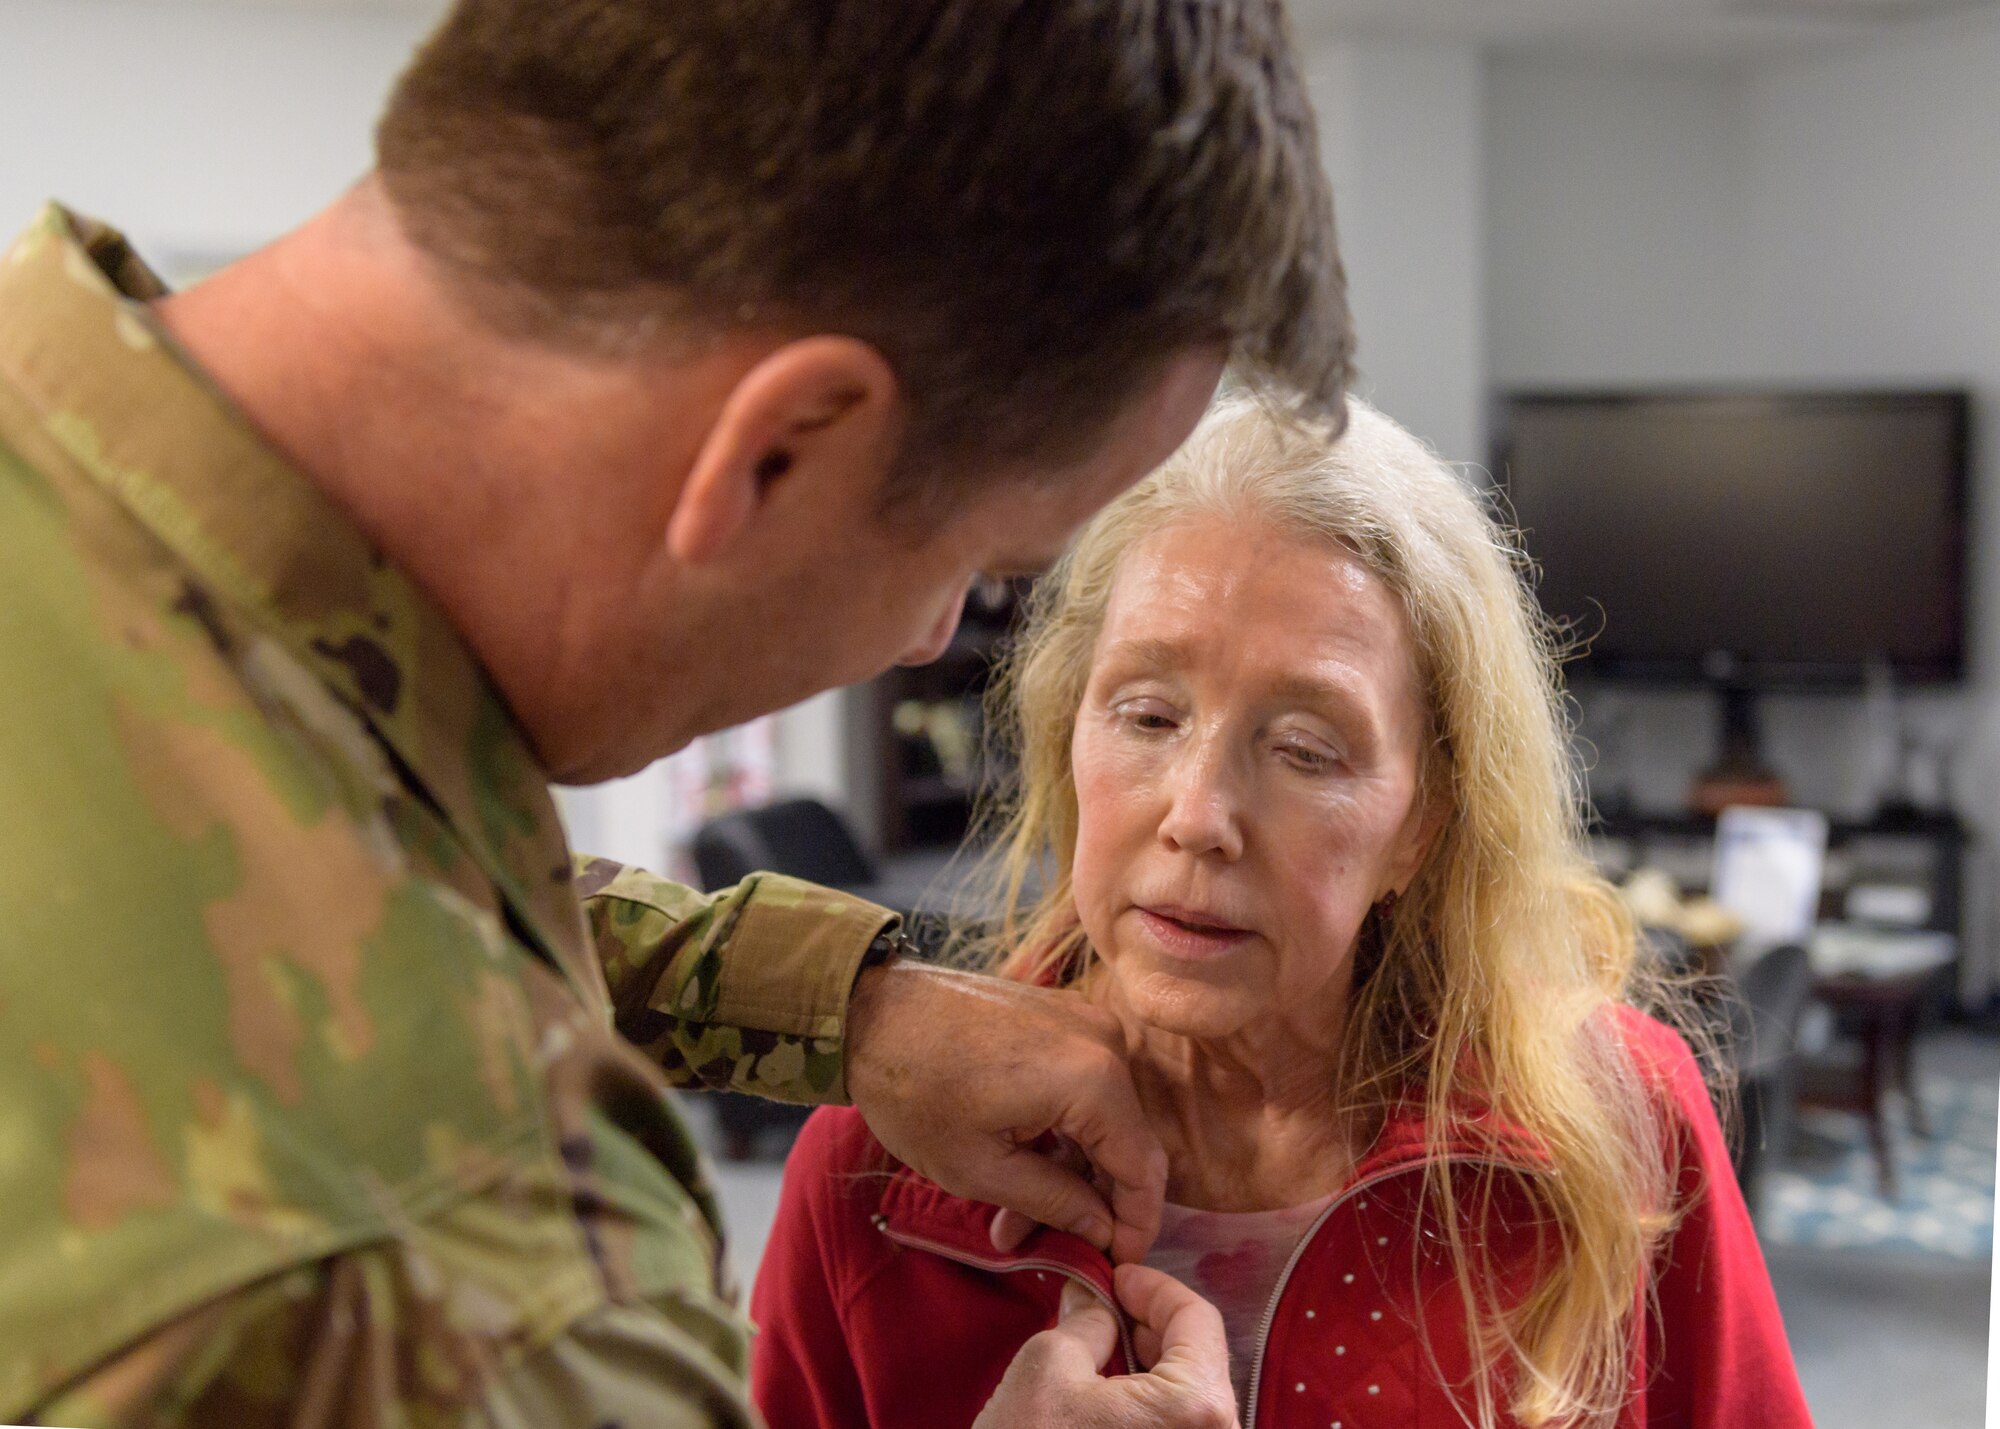 U.S. Air Force Col. Lance Burnett, 81st Training Wing vice commander, pins a Gold Star Family Member lapel pin on the collar of Mary Buckley, daughter of U.S. Air Force Capt. Robert Gereer, inside the Sablich Center at Keesler Air Force Base, Mississippi, Feb. 15, 2019. Gereer served during the Korean War and was placed in a missing in action (MIA) status due to his remains not being found. As a surviving daughter of an MIA service member, Buckley is allowed to obtain an ID card for recognition and installation access so that she can attend events and access A&FRC referral services. (U.S. Air Force photo by Andre' Askew)